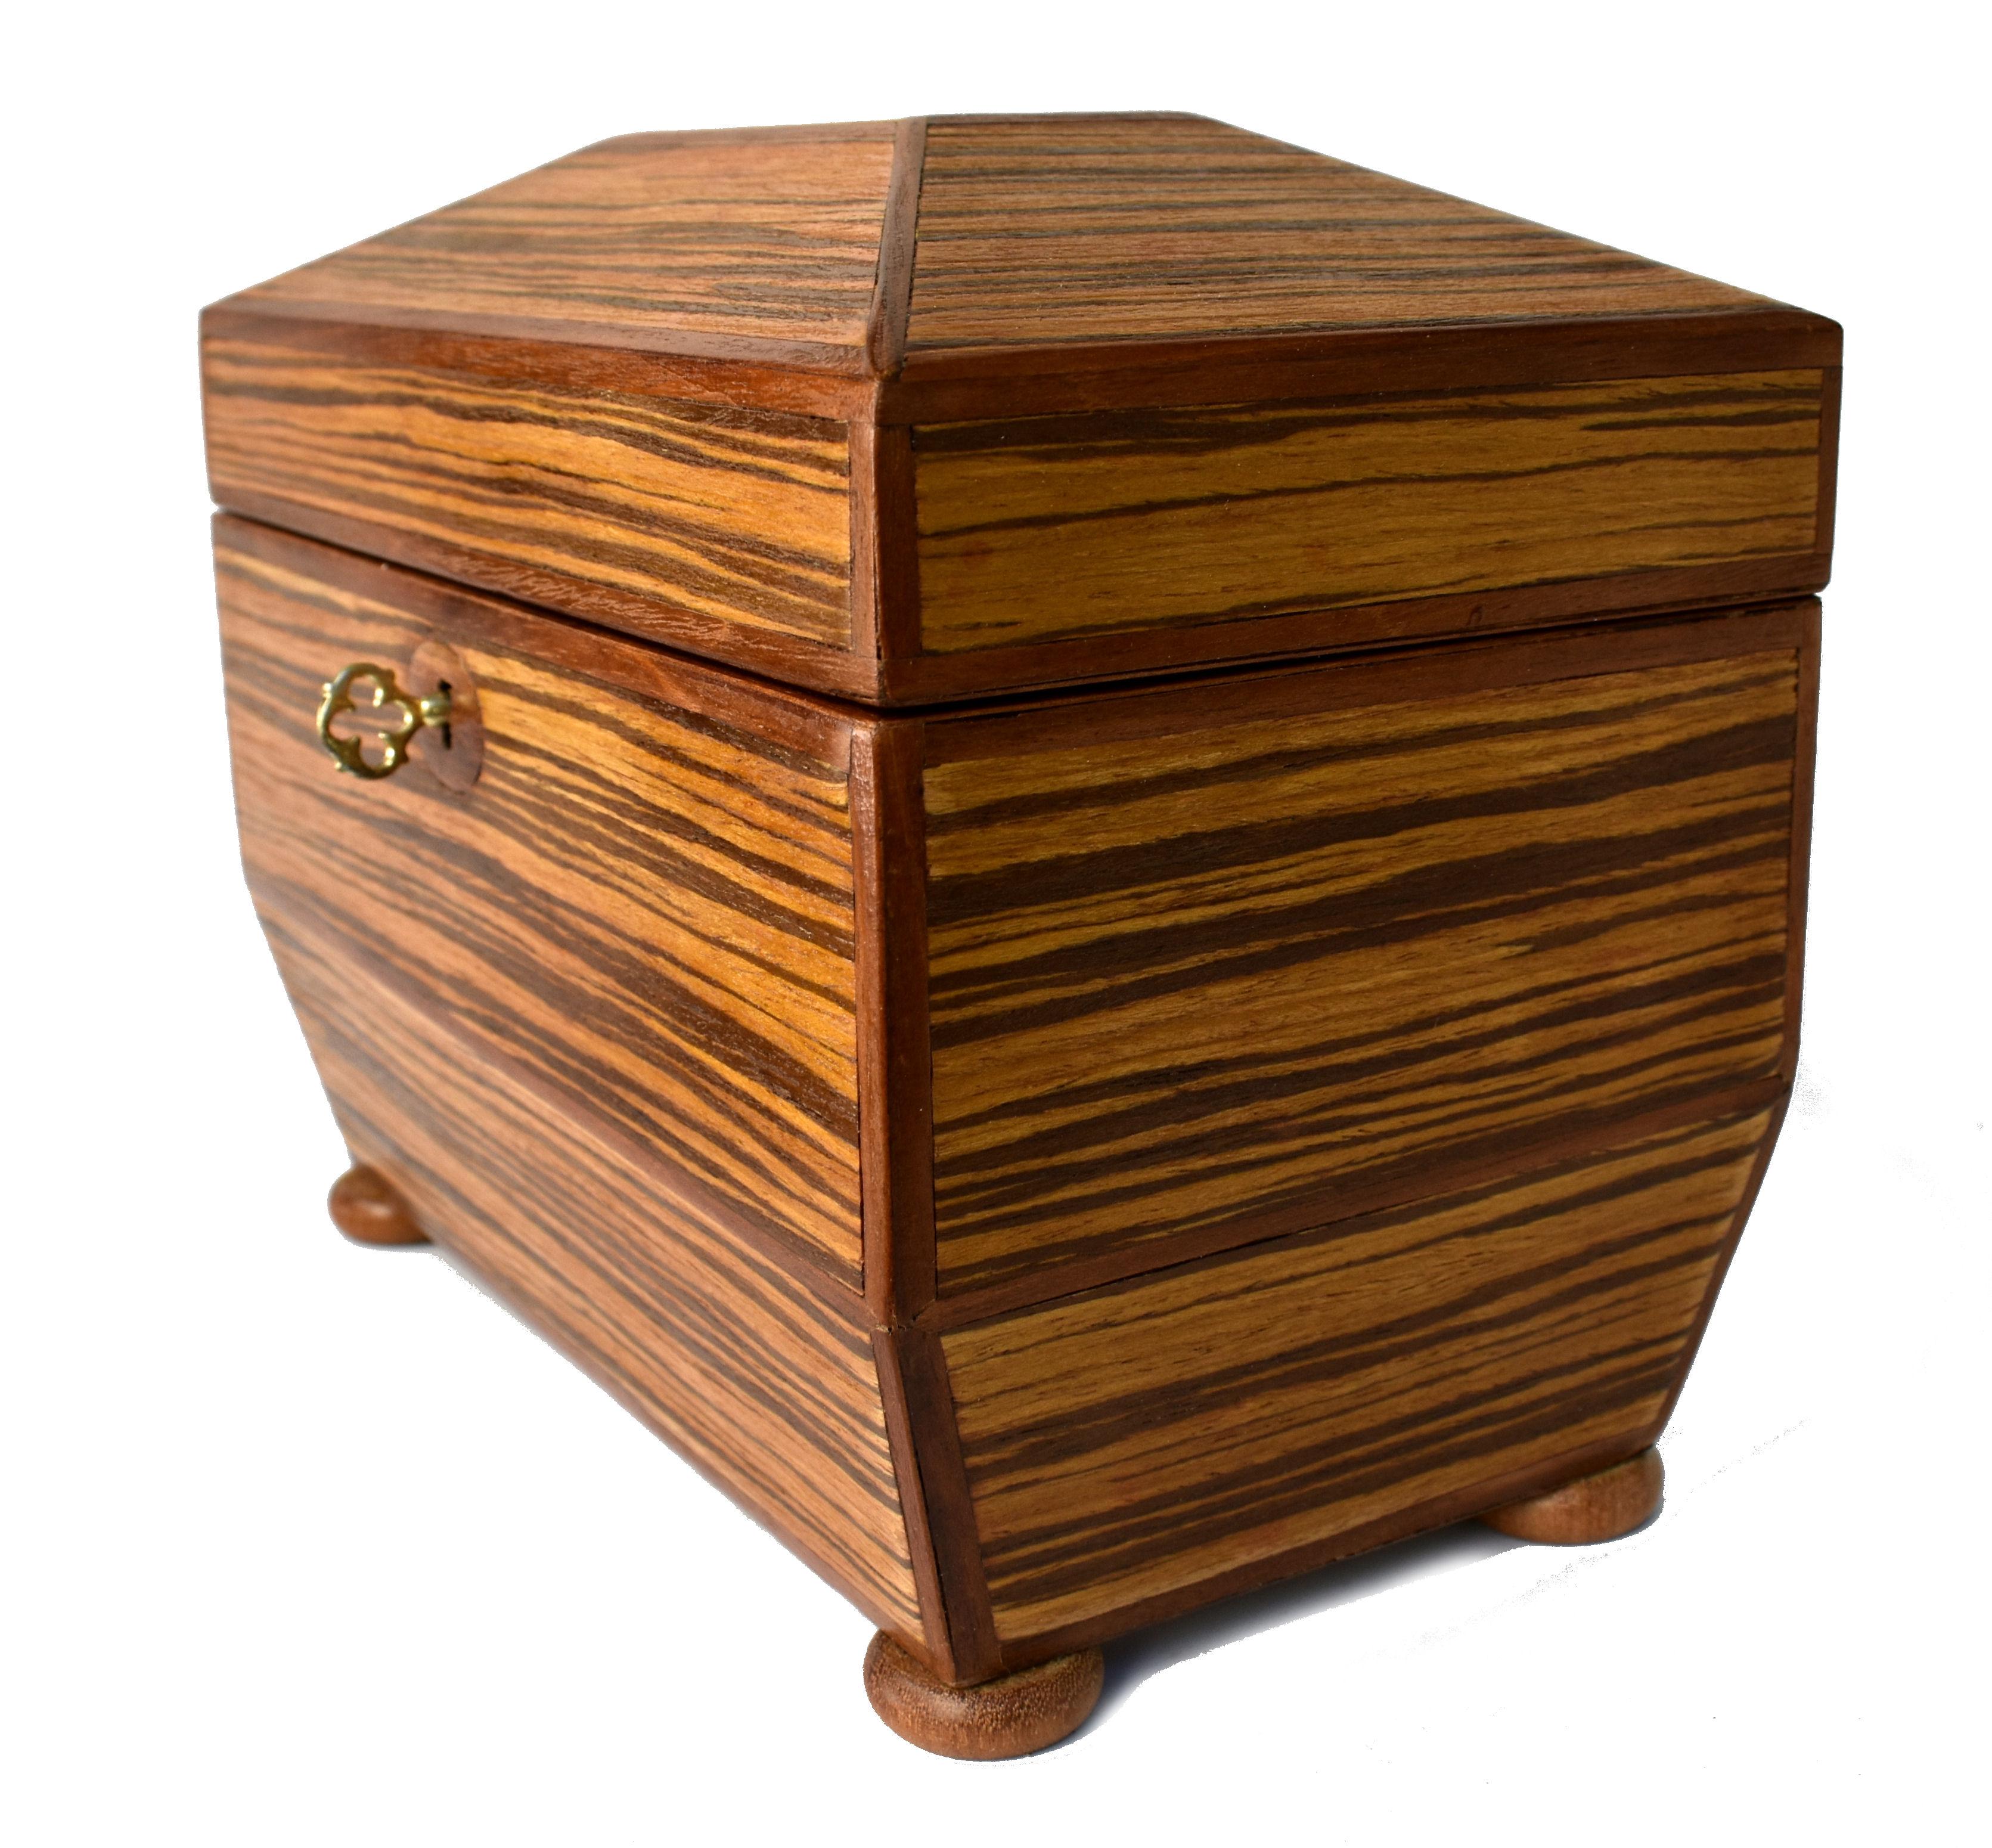 For your consideration is this superbly iconic Art Deco wooden box with a domed lid and iconic sunray pattern inside lid . This box is a great size and making it a very functional piece, many possible uses such as jewellery, trinkets, writing,